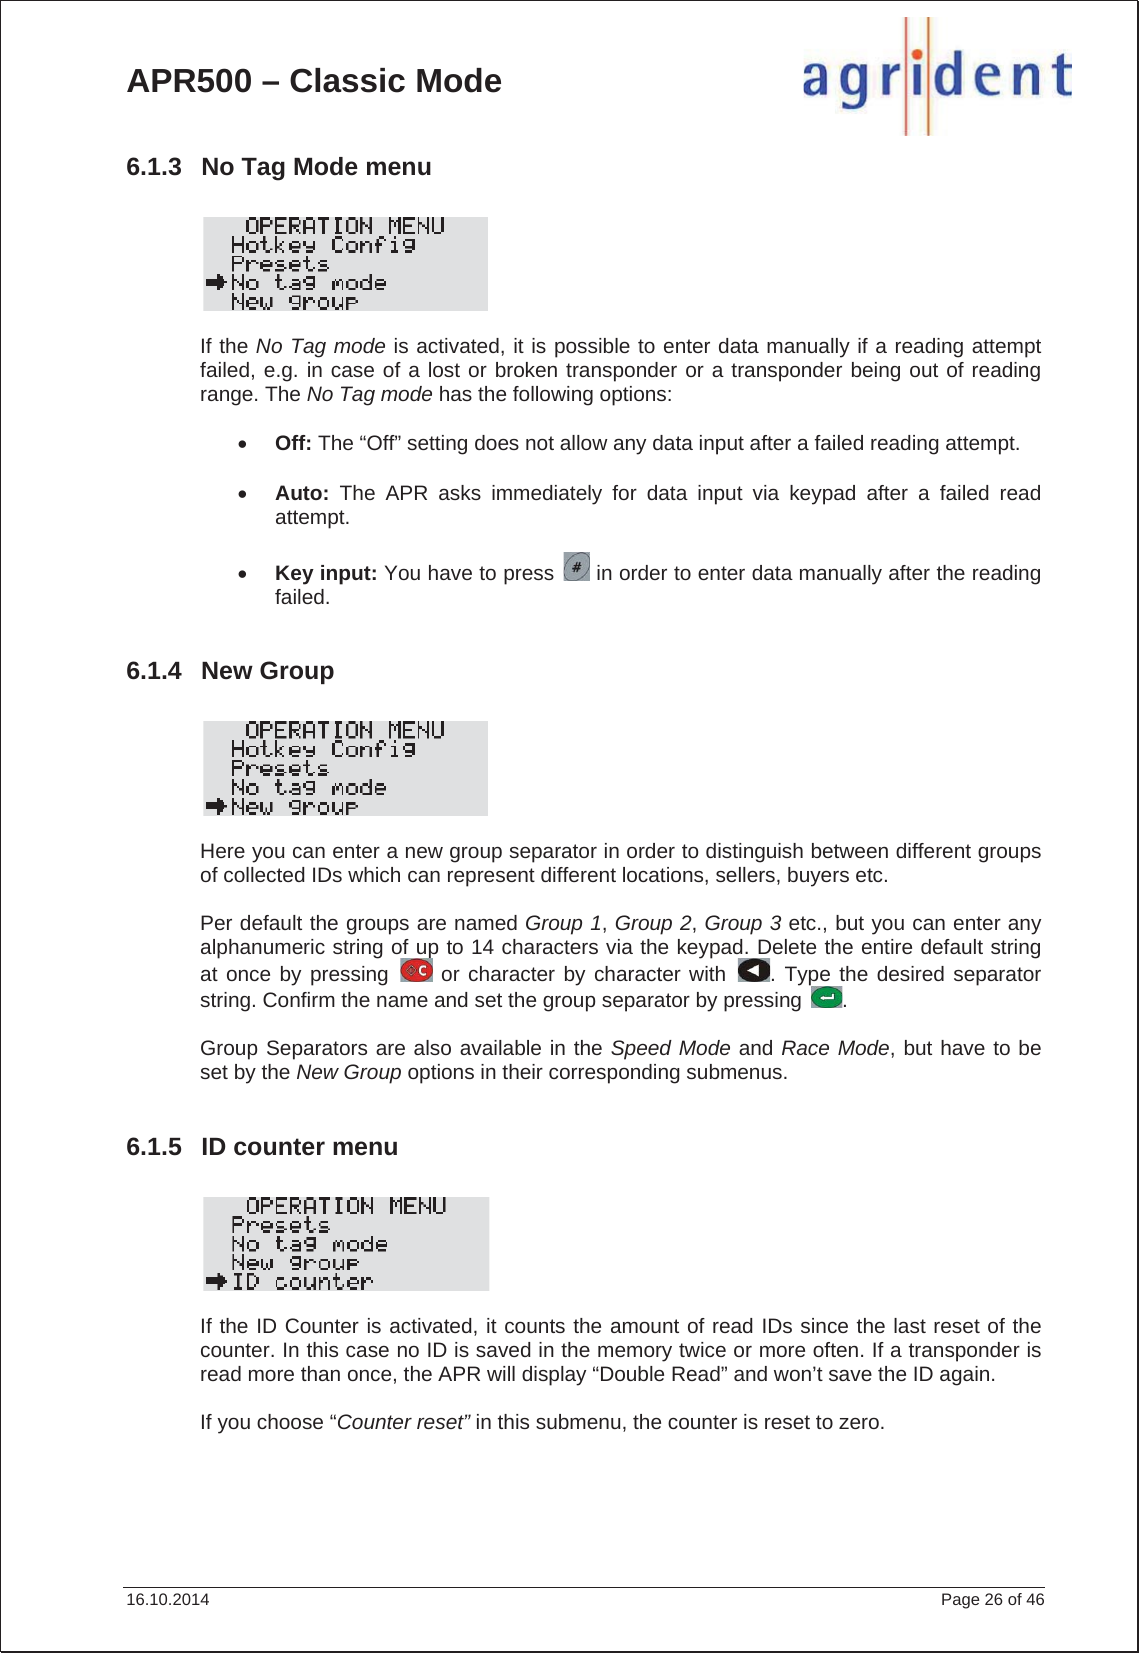 APR500 – Classic Mode 16.10.2014    Page 26 of 46 6.1.3  No Tag Mode menu If the No Tag mode is activated, it is possible to enter data manually if a reading attempt failed, e.g. in case of a lost or broken transponder or a transponder being out of reading range. The No Tag mode has the following options: xOff: The “Off” setting does not allow any data input after a failed reading attempt. xAuto: The APR asks immediately for data input via keypad after a failed read attempt.xKey input: You have to press   in order to enter data manually after the reading failed.6.1.4 New Group Here you can enter a new group separator in order to distinguish between different groups of collected IDs which can represent different locations, sellers, buyers etc. Per default the groups are named Group 1, Group 2, Group 3 etc., but you can enter any alphanumeric string of up to 14 characters via the keypad. Delete the entire default string at once by pressing   or character by character with  . Type the desired separator string. Confirm the name and set the group separator by pressing  . Group Separators are also available in the Speed Mode and Race Mode, but have to be set by the New Group options in their corresponding submenus. 6.1.5  ID counter menu If the ID Counter is activated, it counts the amount of read IDs since the last reset of the counter. In this case no ID is saved in the memory twice or more often. If a transponder is read more than once, the APR will display “Double Read” and won’t save the ID again. If you choose “Counter reset” in this submenu, the counter is reset to zero. 